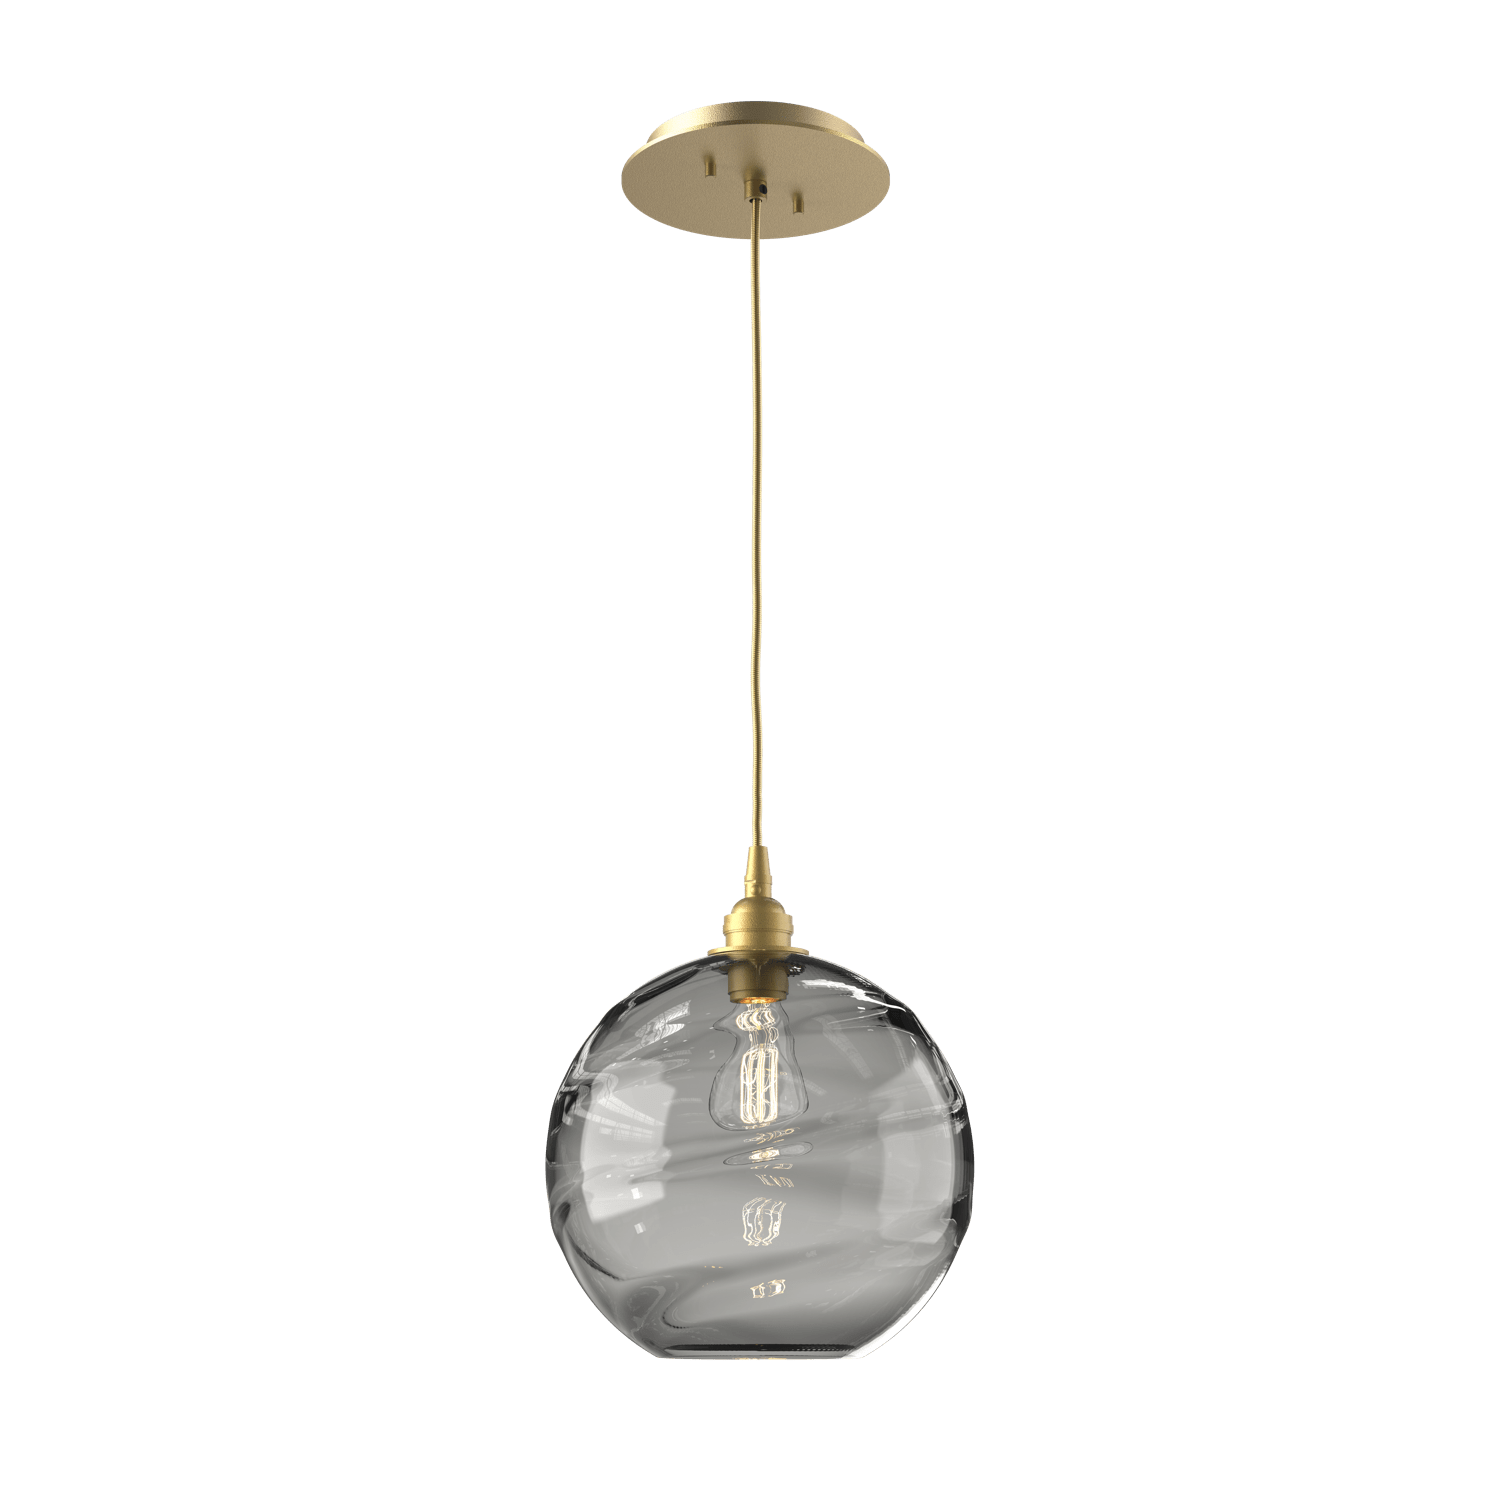 LAB0047-01-GB-OS-Hammerton-Studio-Optic-Blown-Glass-Terra-pendant-light-with-gilded-brass-finish-and-optic-smoke-blown-glass-shades-and-incandescent-lamping